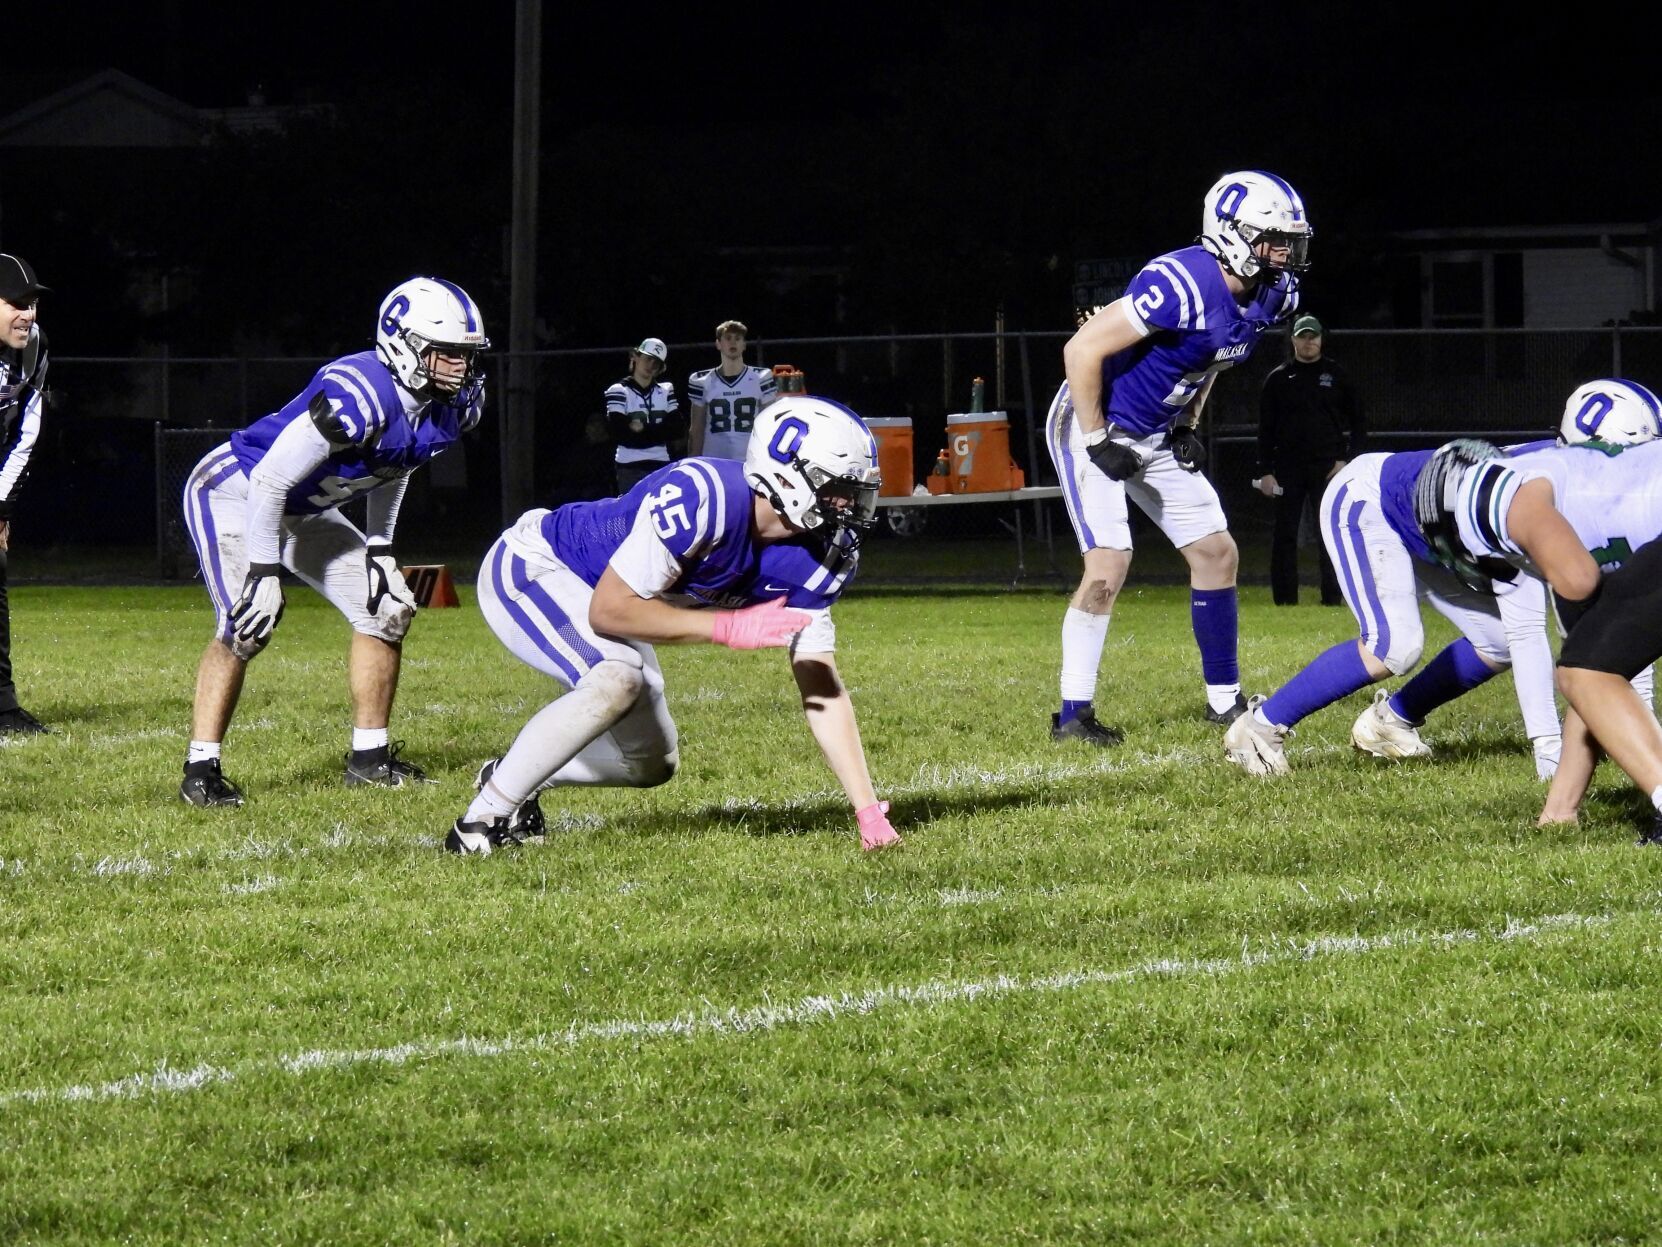 Onalaska High School dominates Rhinelander with a 56-6 victory in Division 3 playoff opener